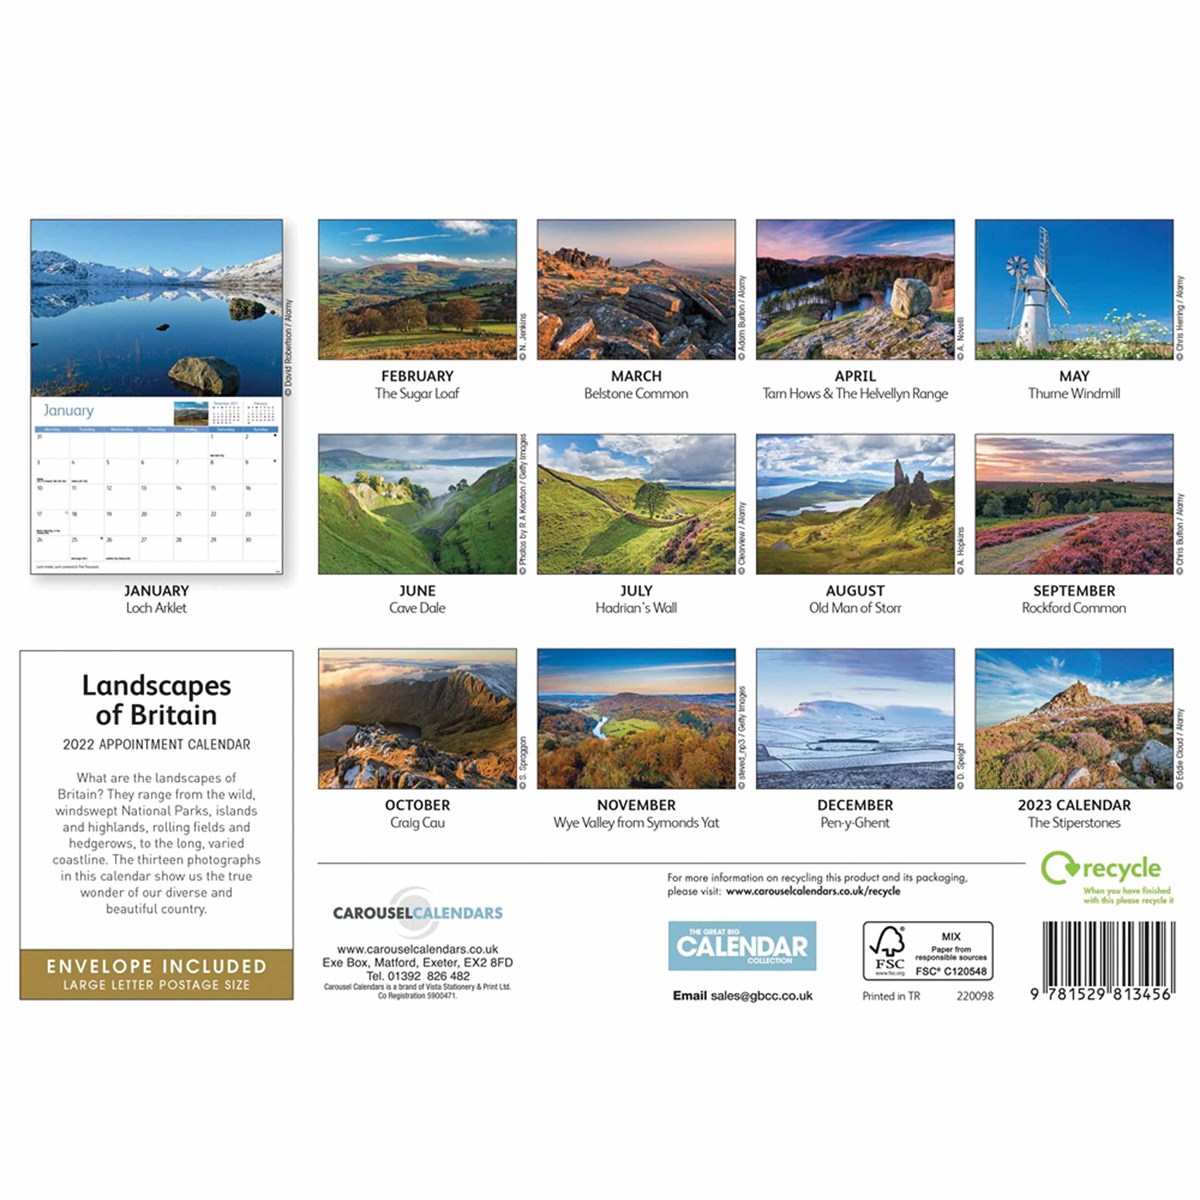 Landscapes of Britain 2022 A4 Calendar by Carousel Calendars 220098 